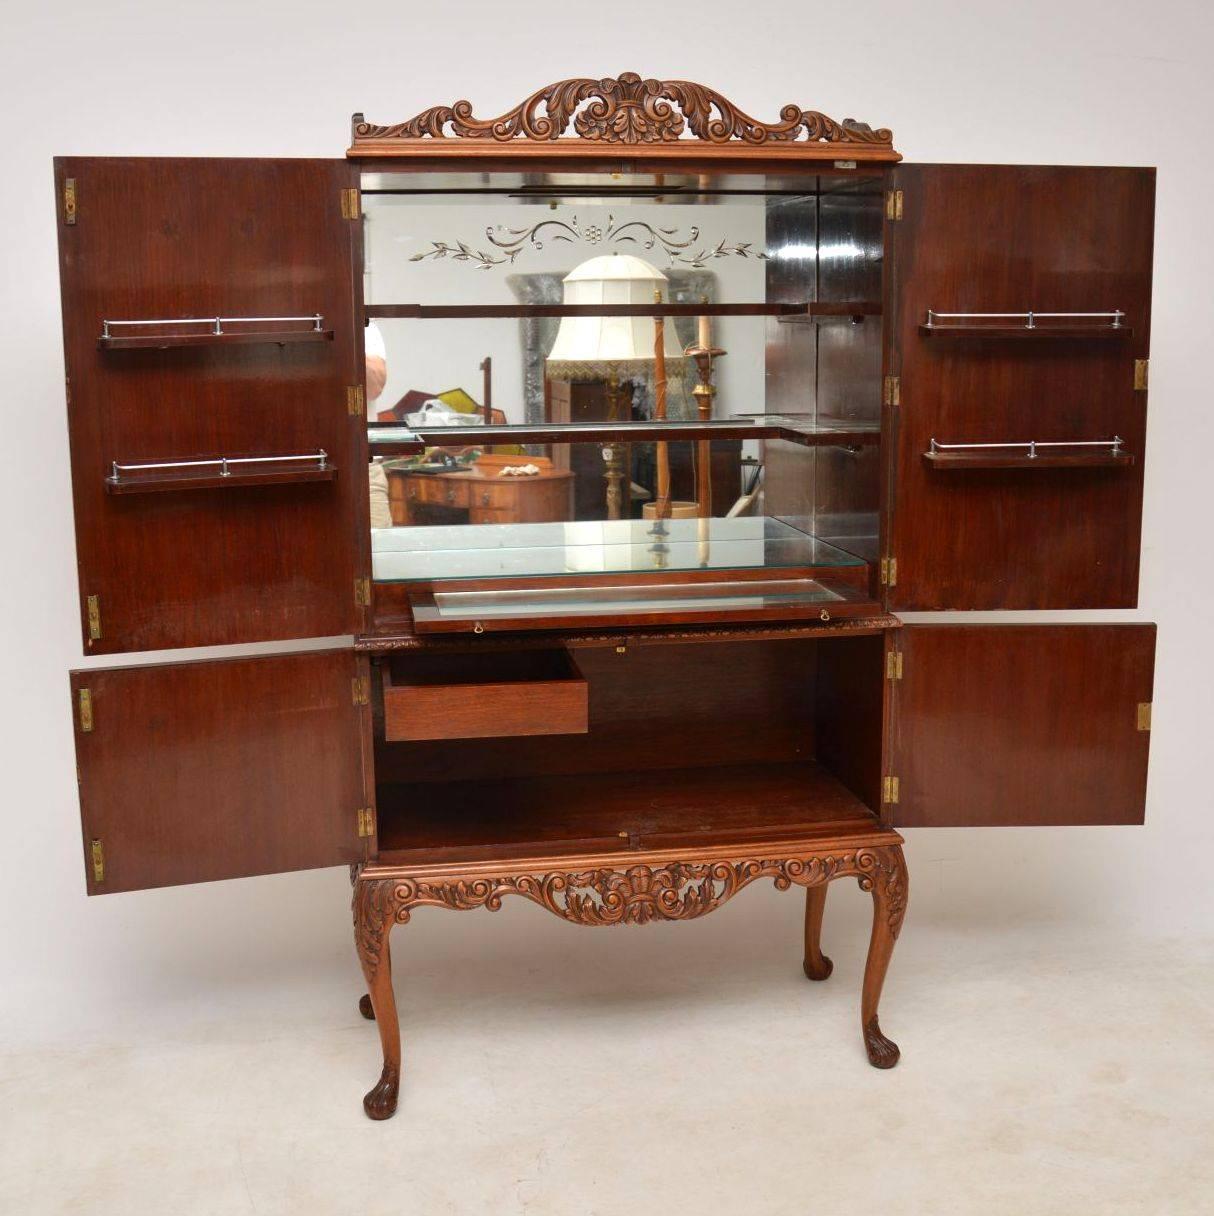 Very impressive antique Queen Anne style burr walnut drinks cabinet dating to circa 1920s period. The burr walnut veneers have wonderful patterns and are all-over the front and the sides. The hand carvings are also exceptional around the top, bottom